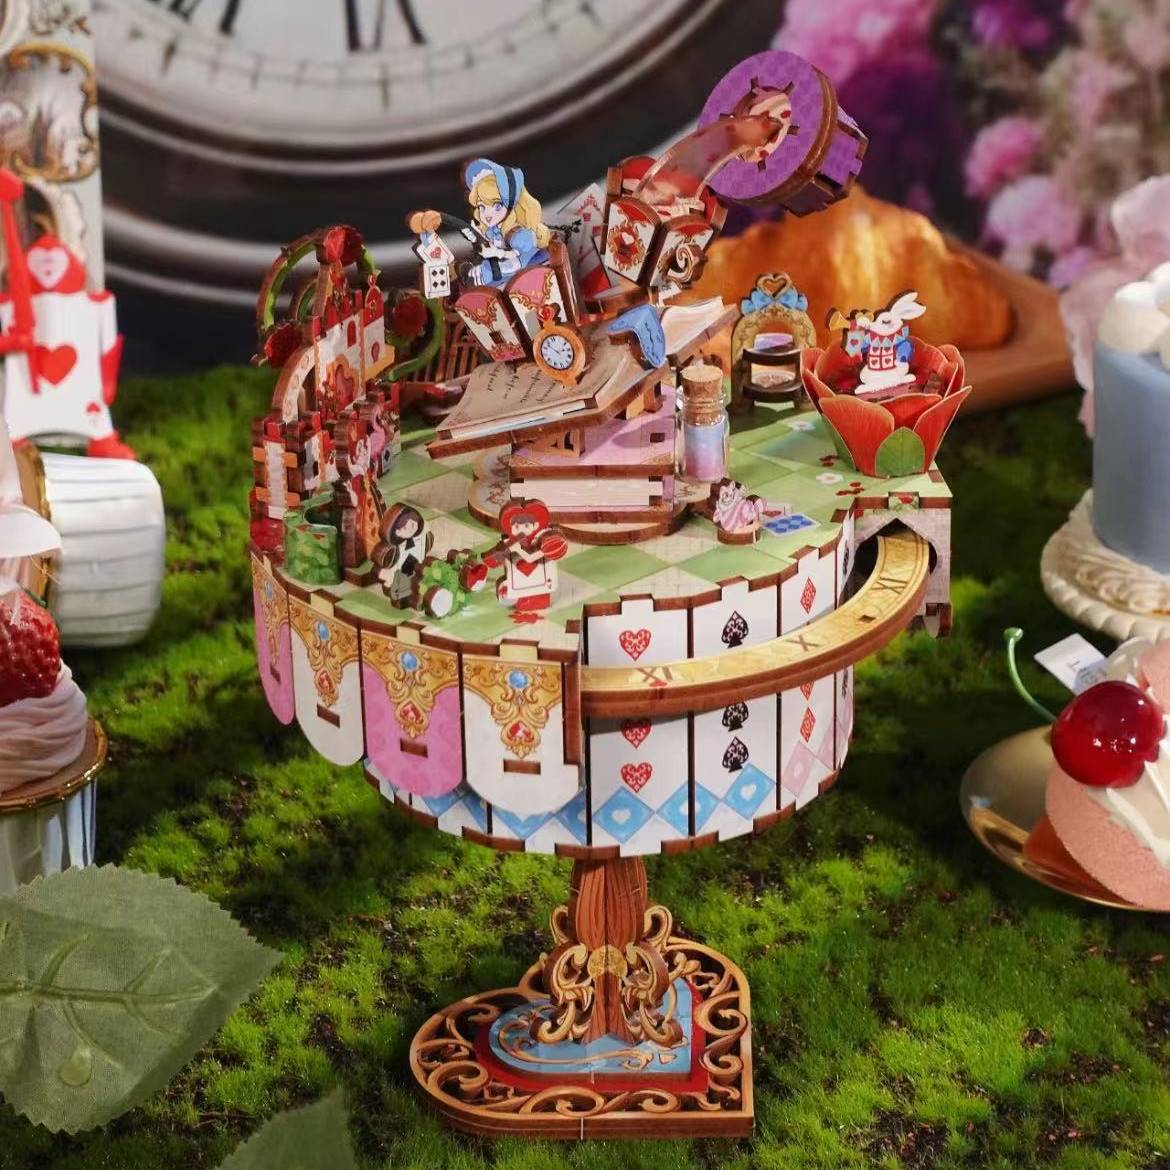 alice's tea party diy music box 3d wooden puzzles assembly miniature house dollhouse diorama